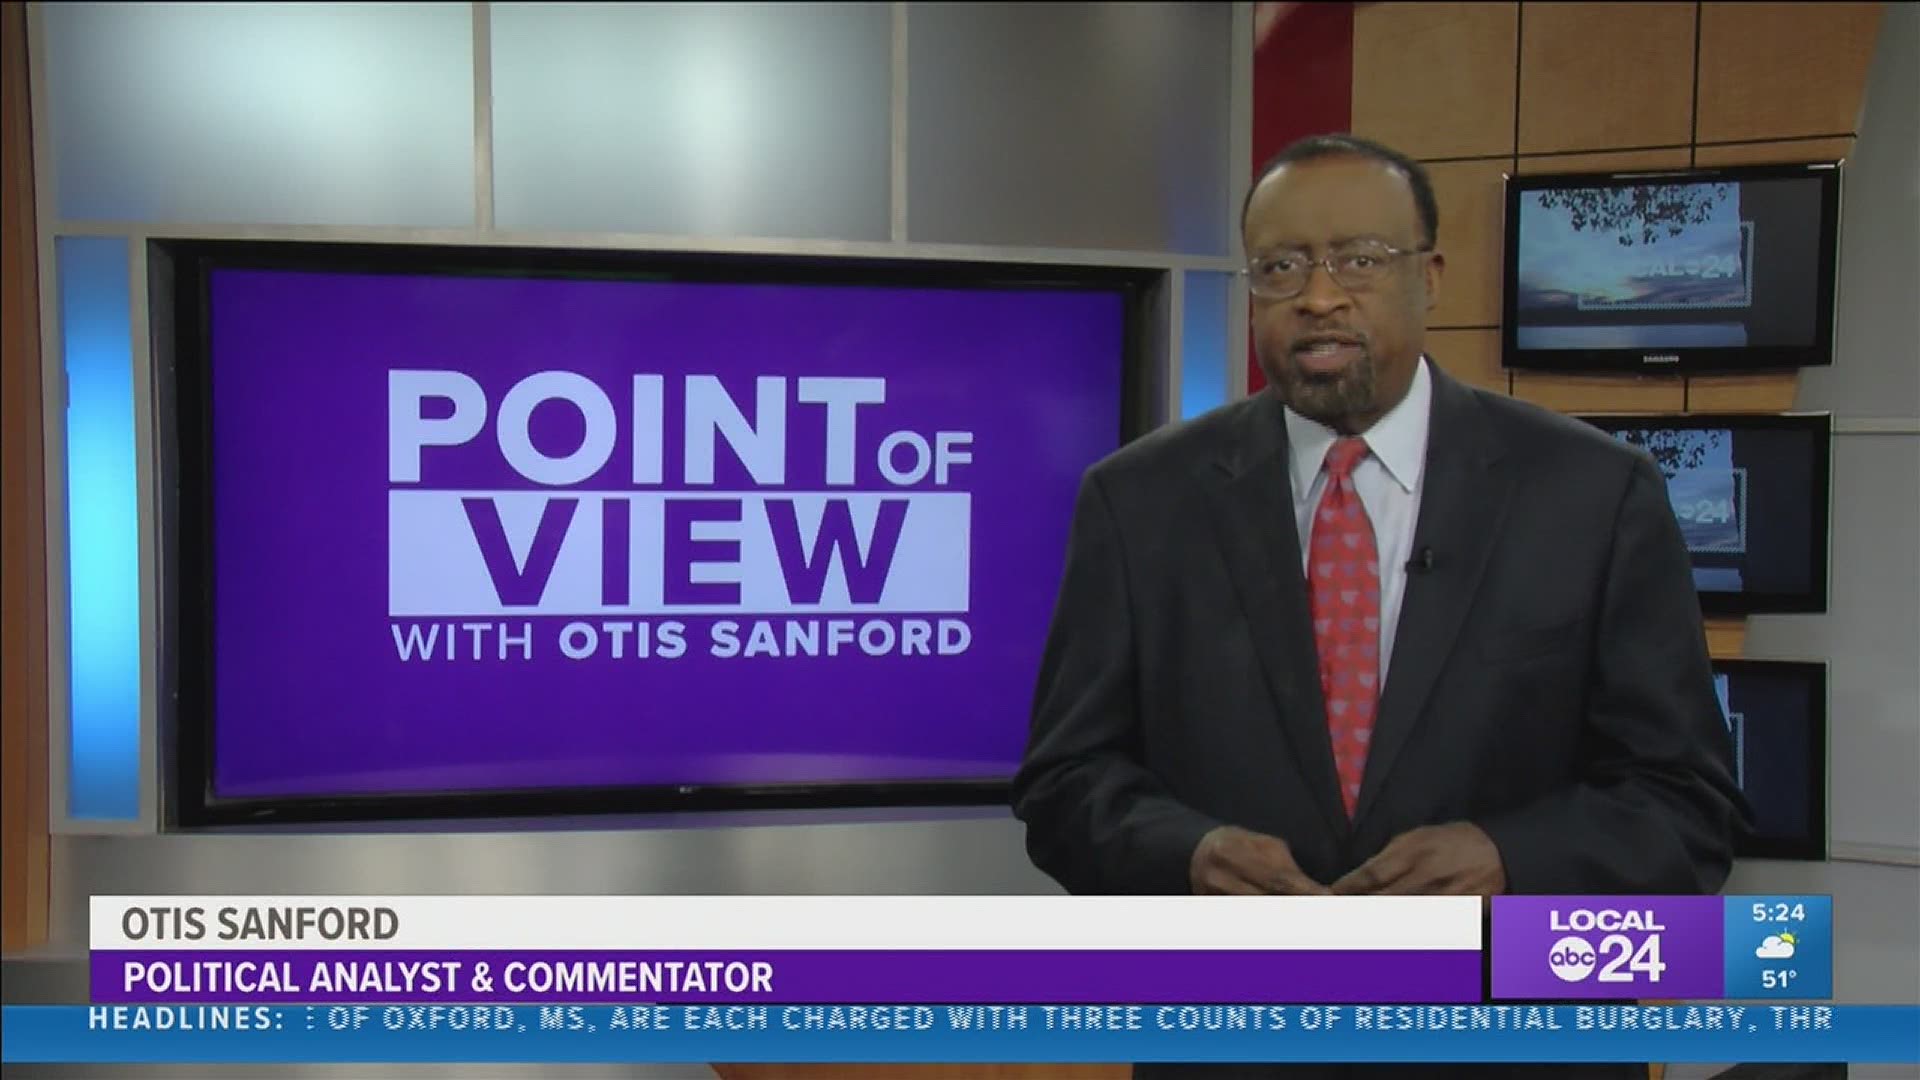 Local 24 News political analyst and commentator Otis Sanford shares his point of view on Wednesday’s inauguration.